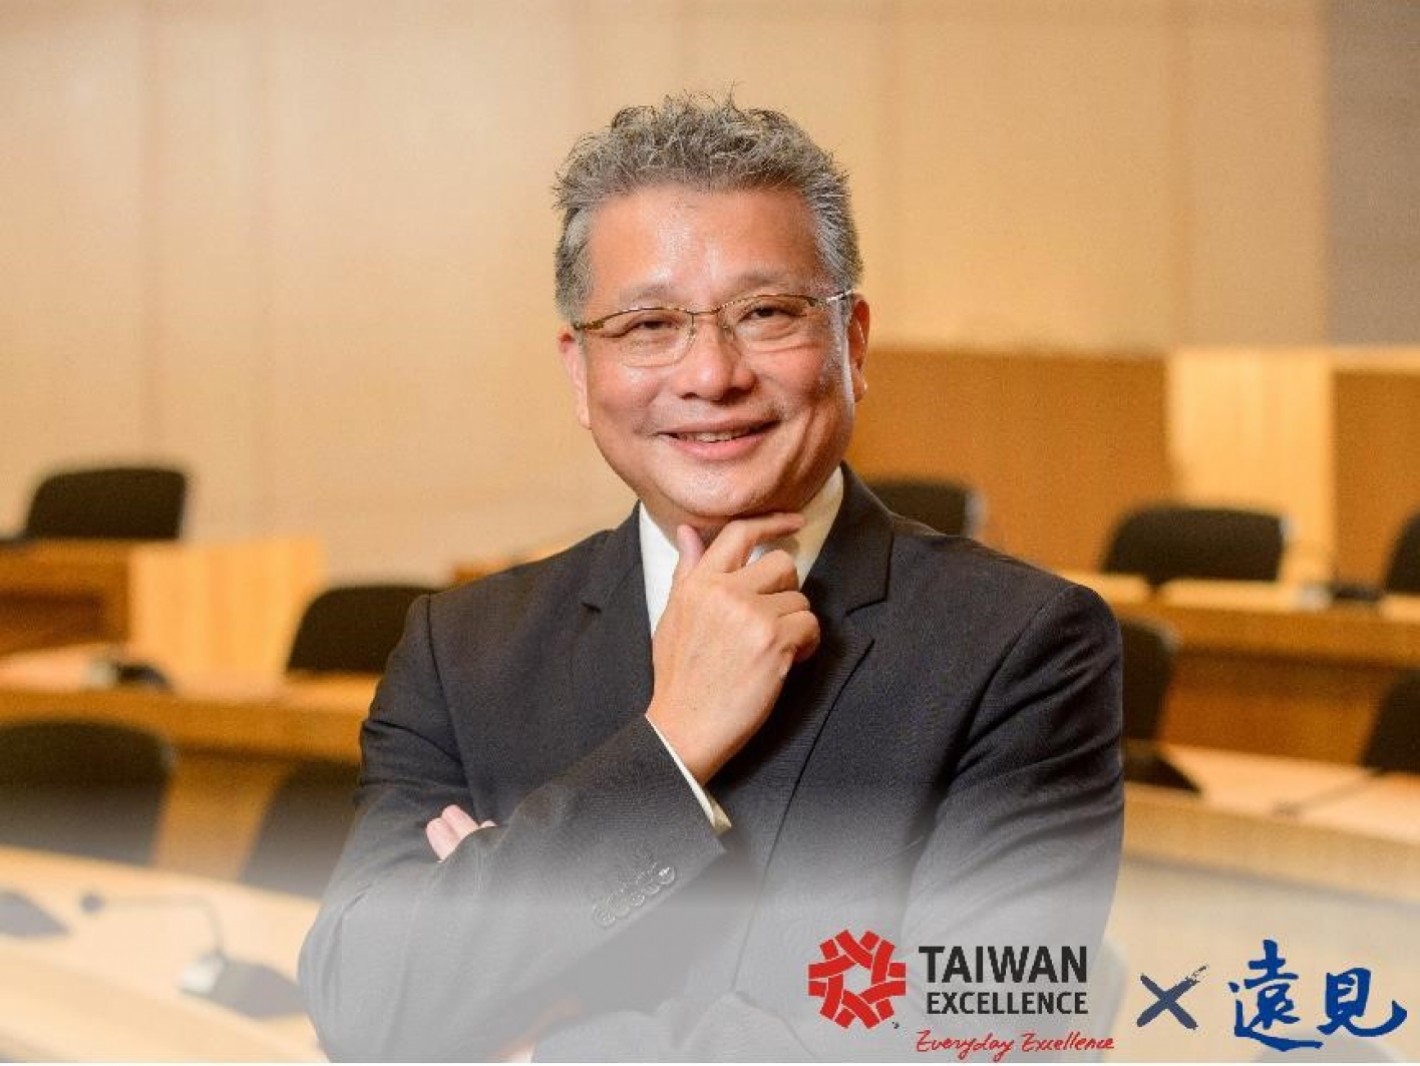 Chairman of Protech Systems Co., Ltd., Tsung-Pao, Wu stated that he wanted to set an internal benchmark by participating in the Taiwan Excellence Award. It was also a testament to Protech Systems Co.,